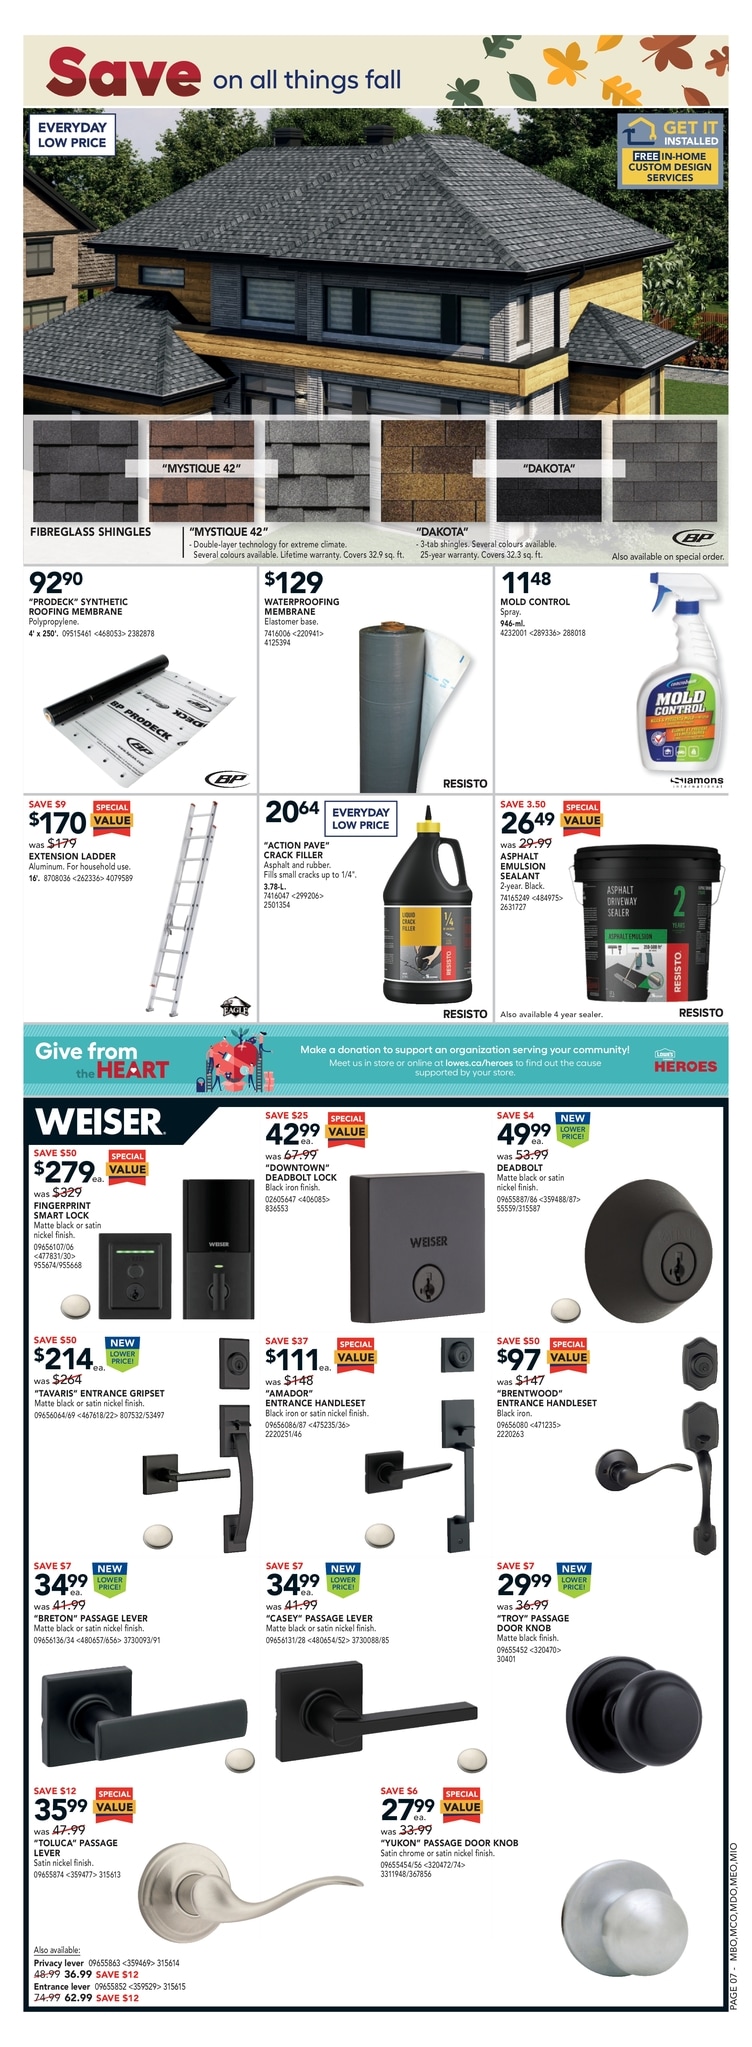 Lowe's - Weekly Flyer Specials - Page 8